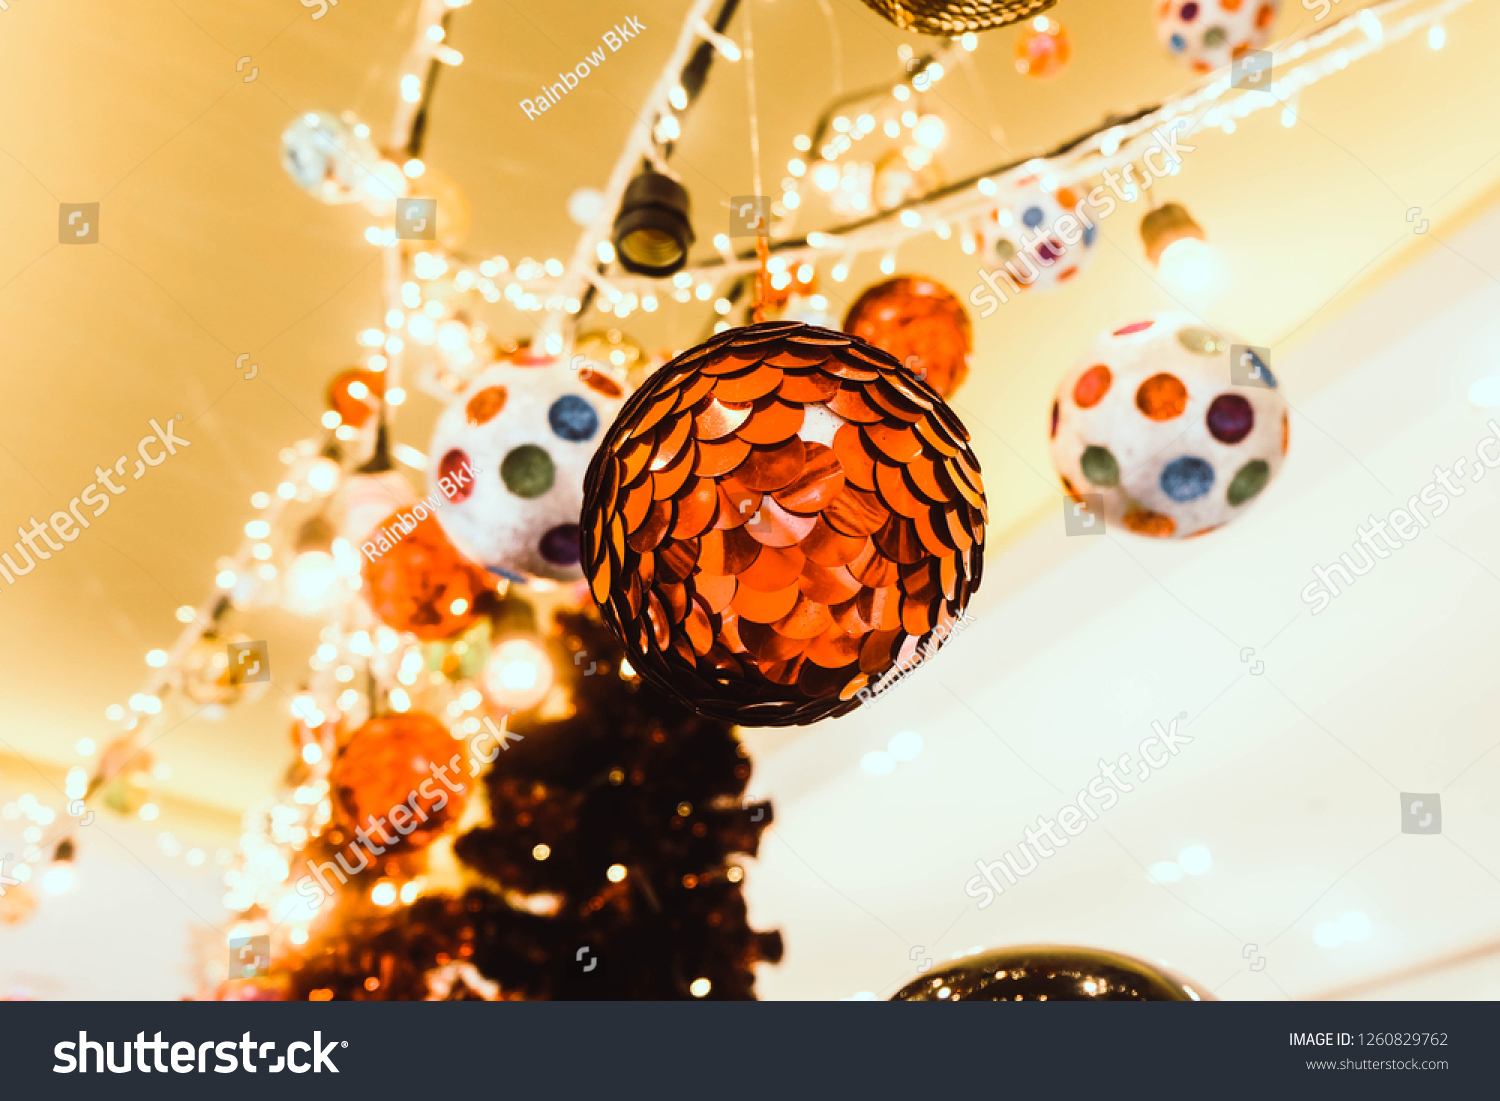 Colorful Christmas Balls Decoration Hanging Ceiling Stock